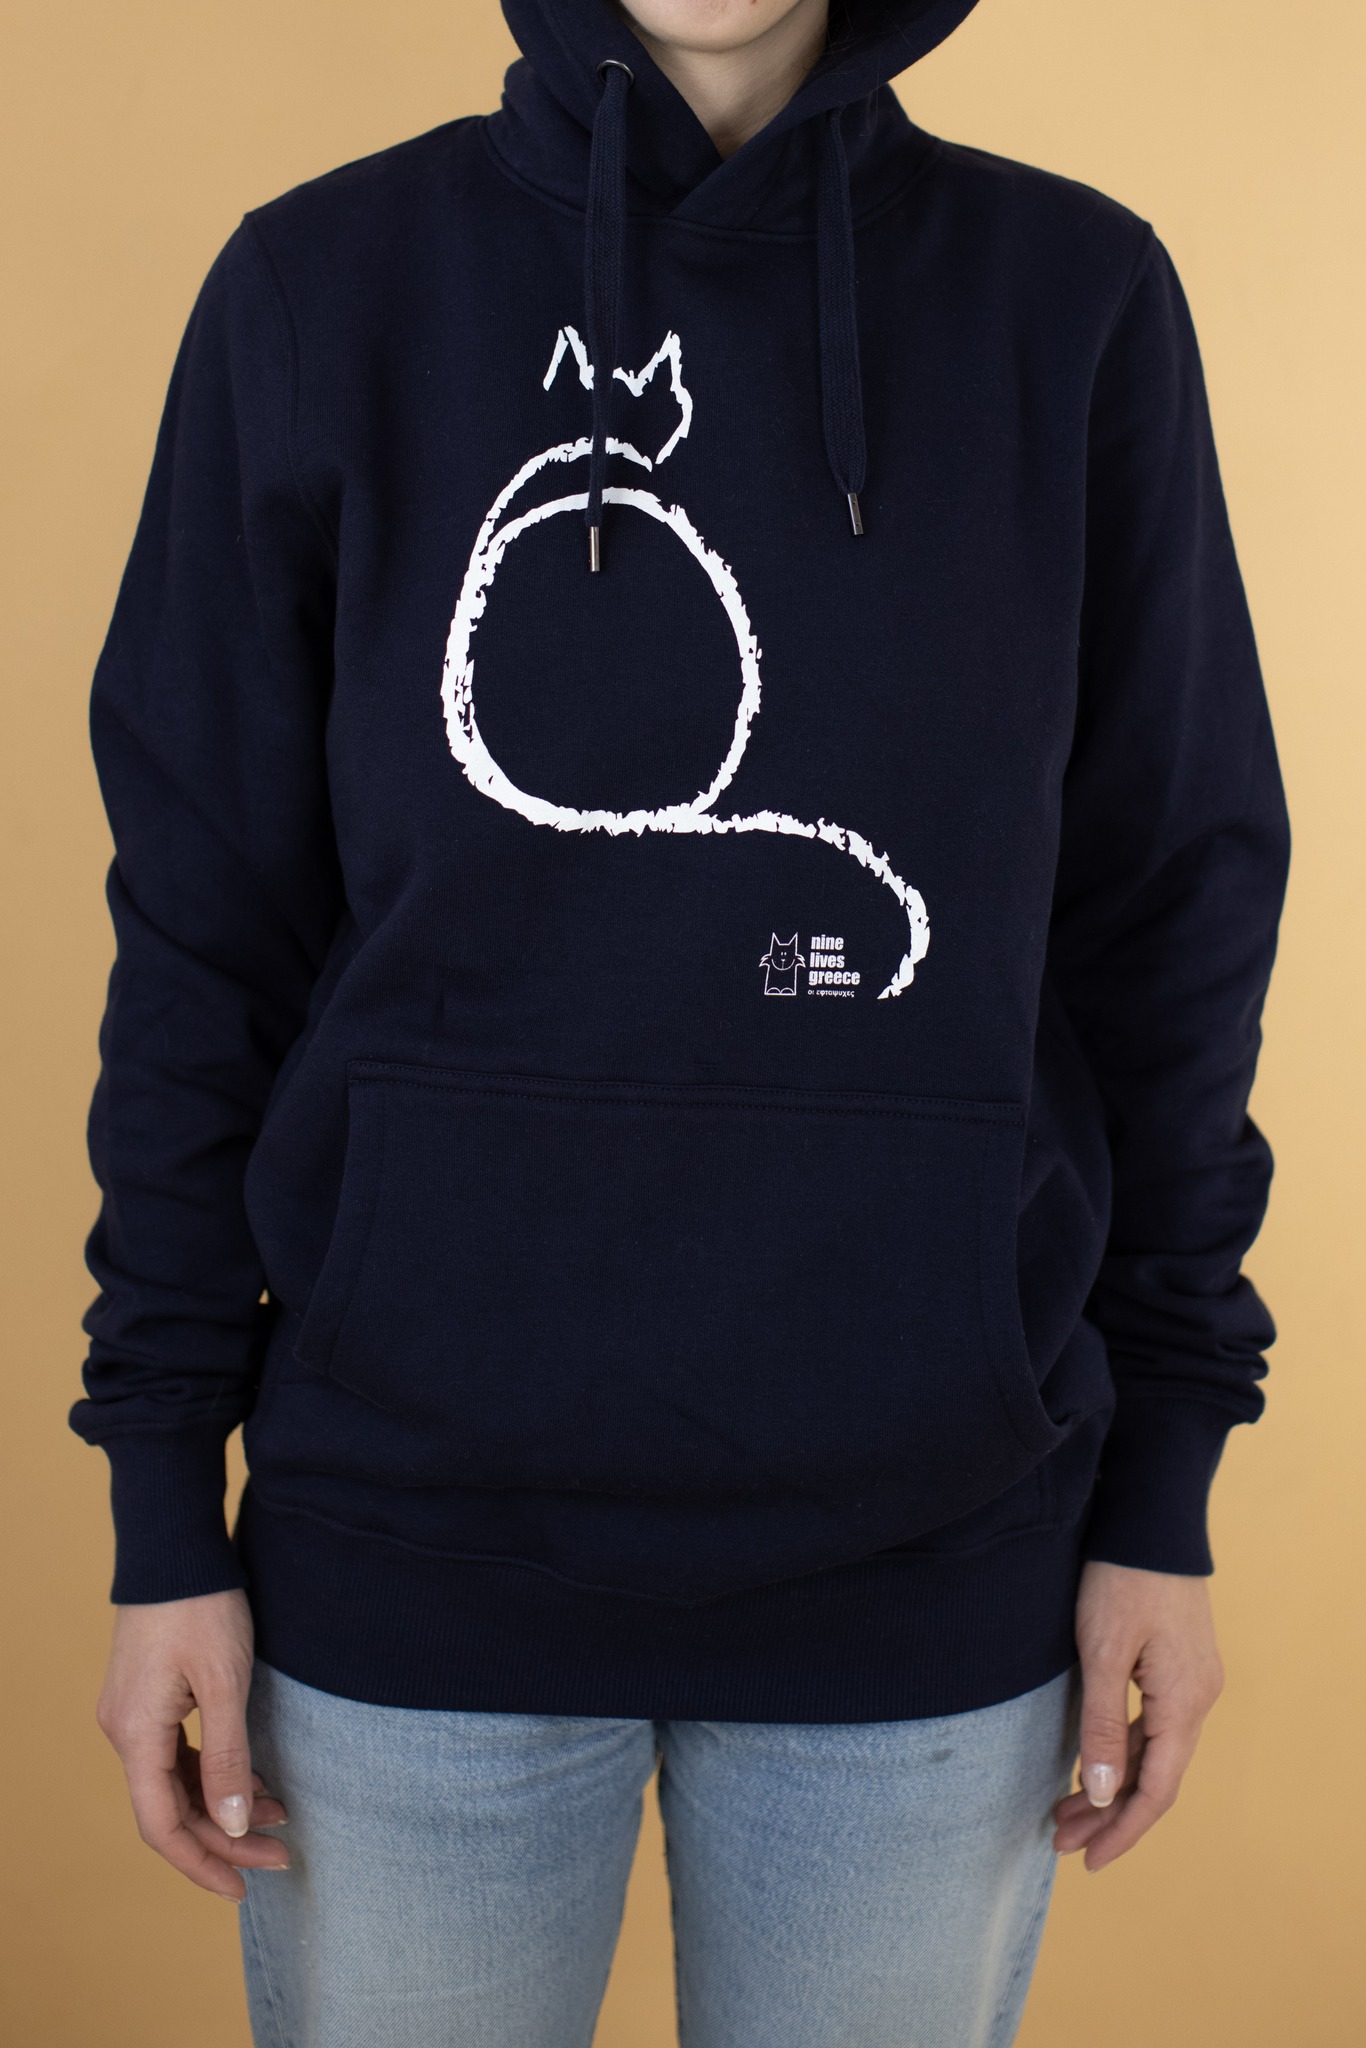 A denim blue hoodie with pockets with a sitting cat print.